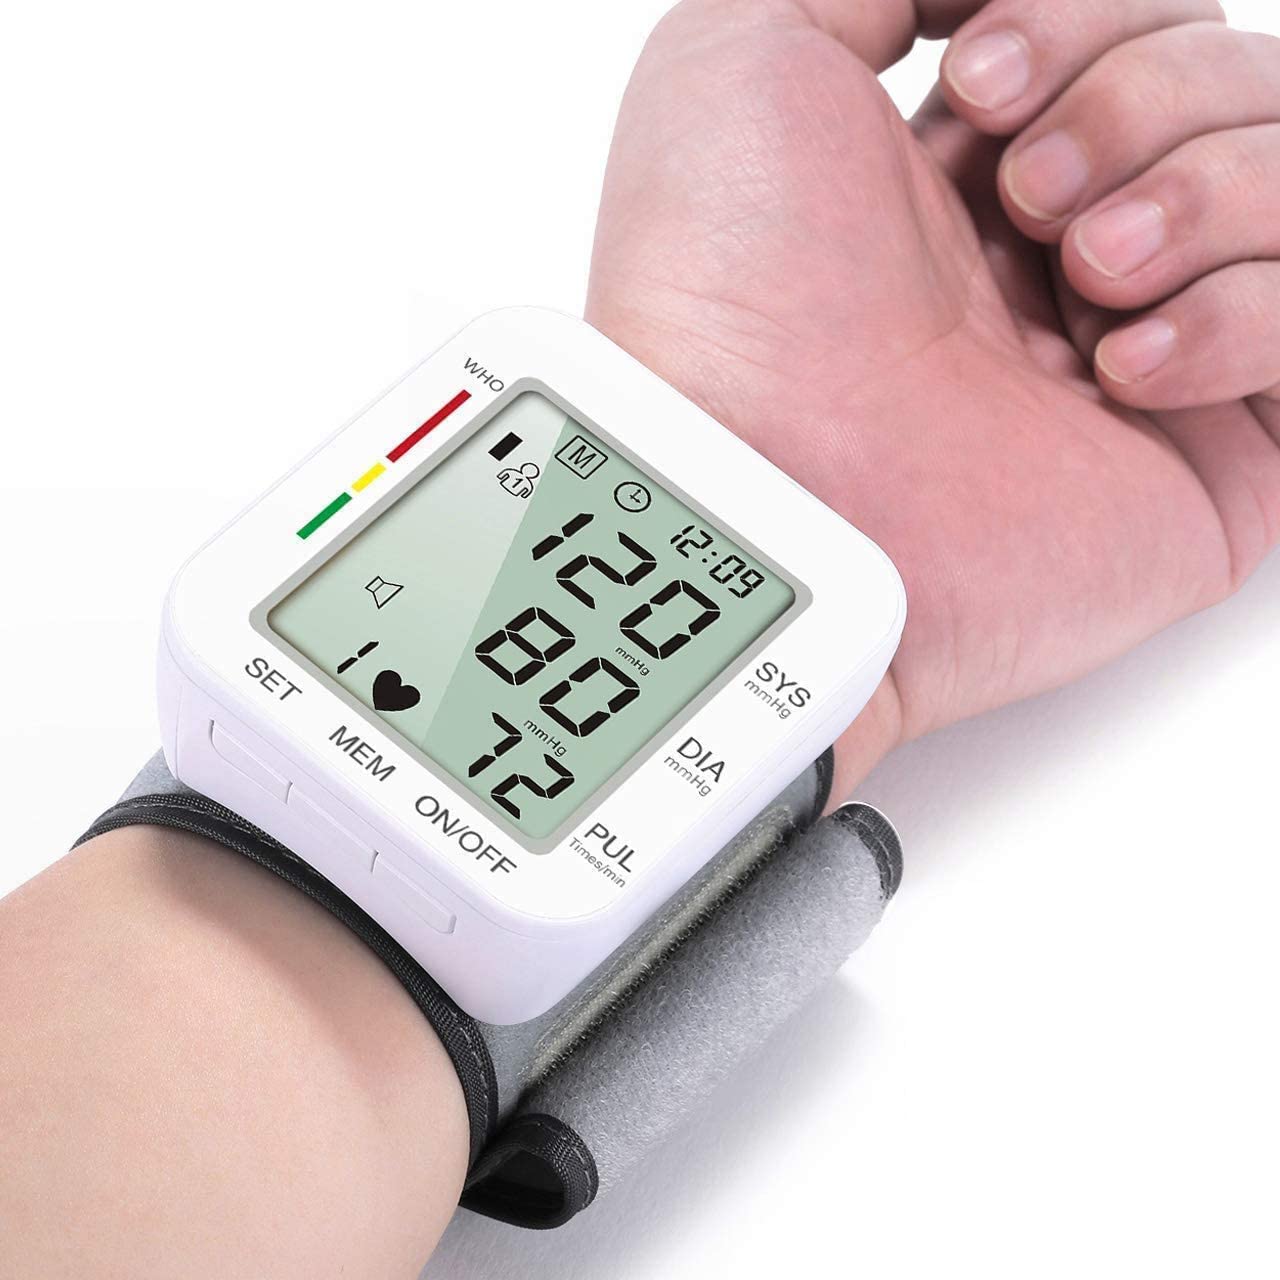 Electronic Digital Automatic Blood Pressure Monitor With Voice Function